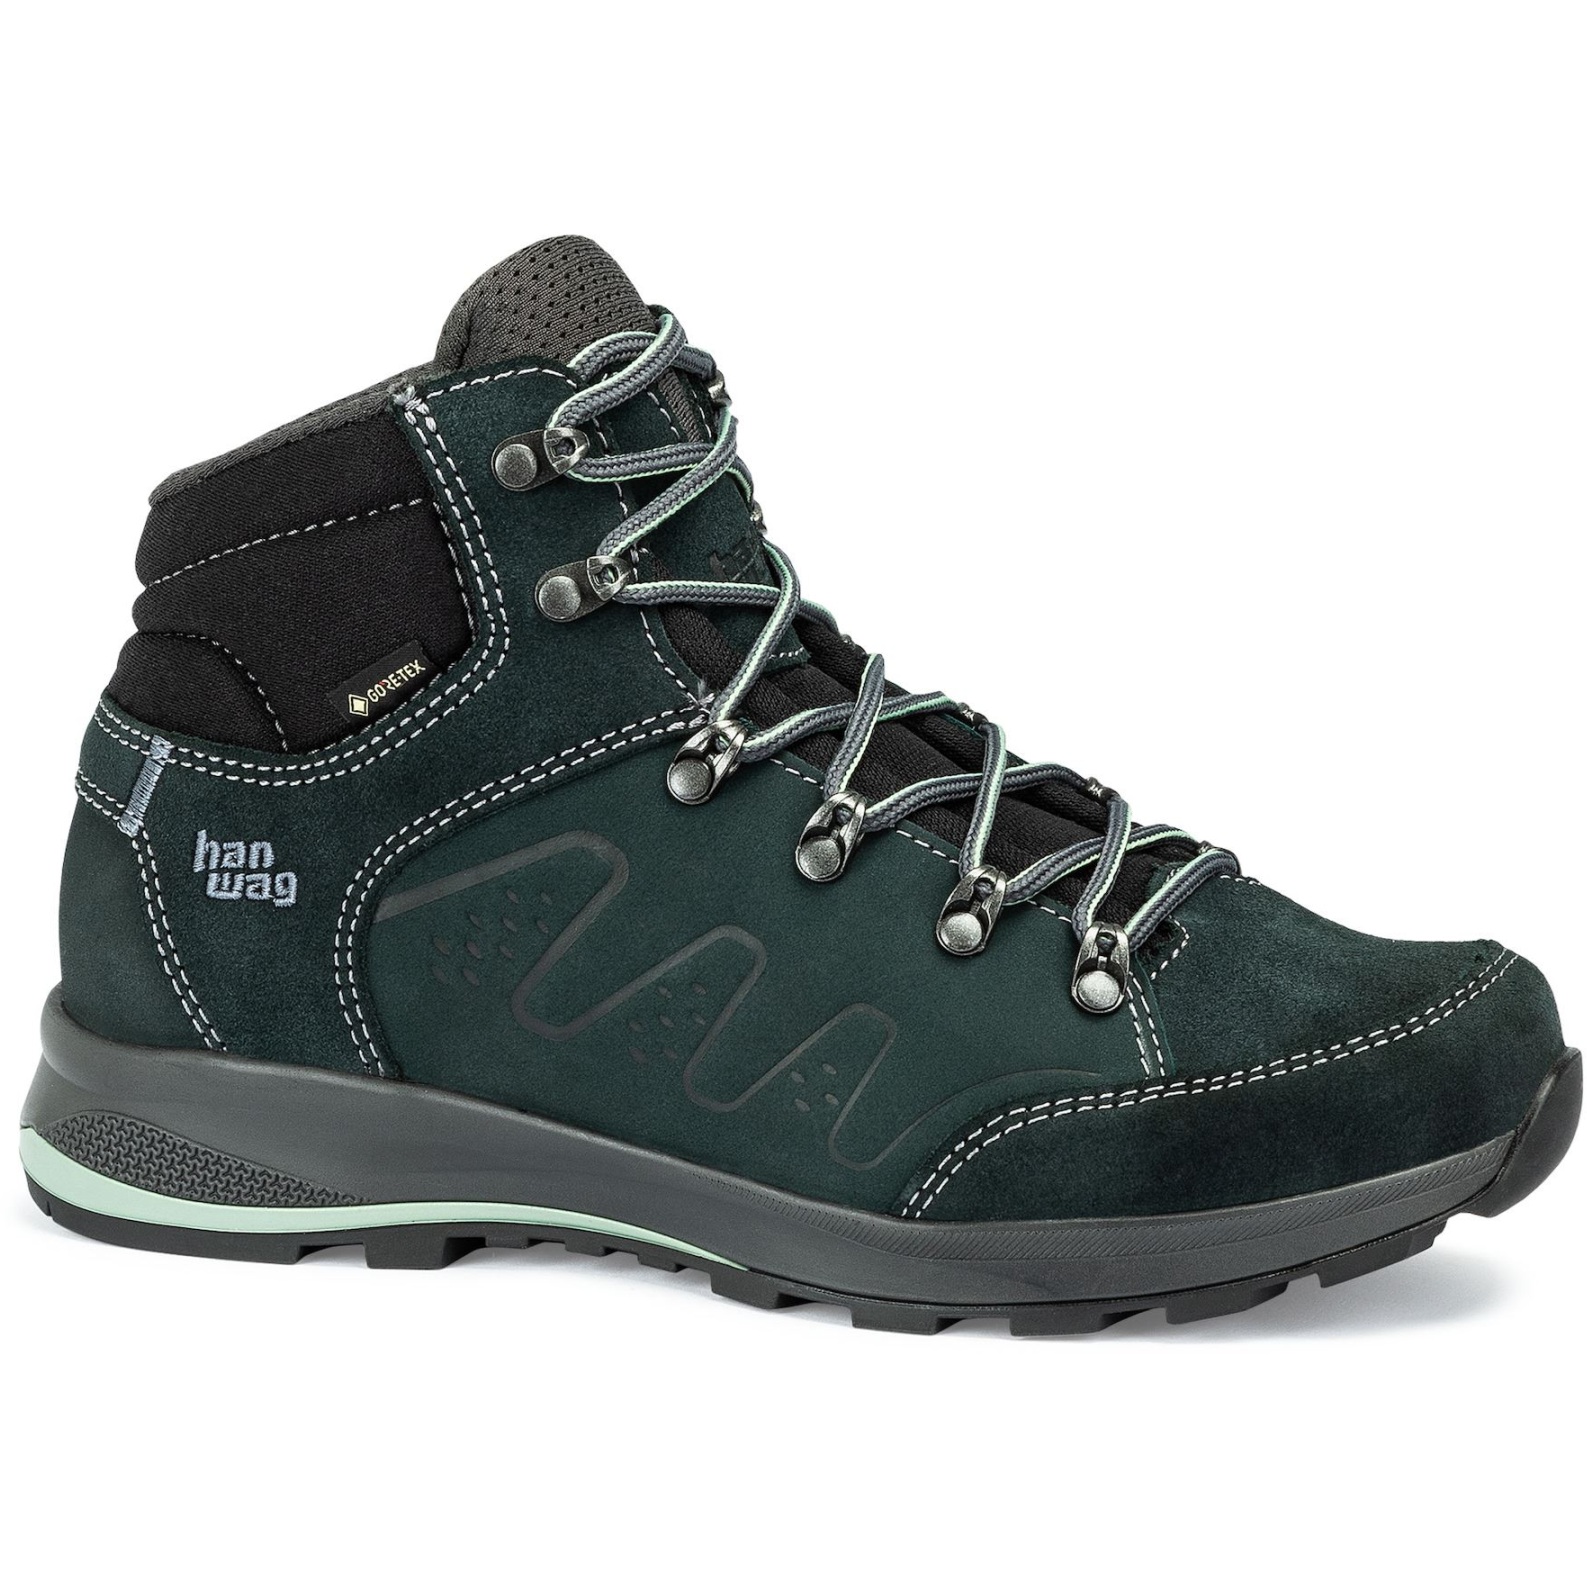 Picture of Hanwag Torsby Lady GTX Shoe - Petrol/Mint